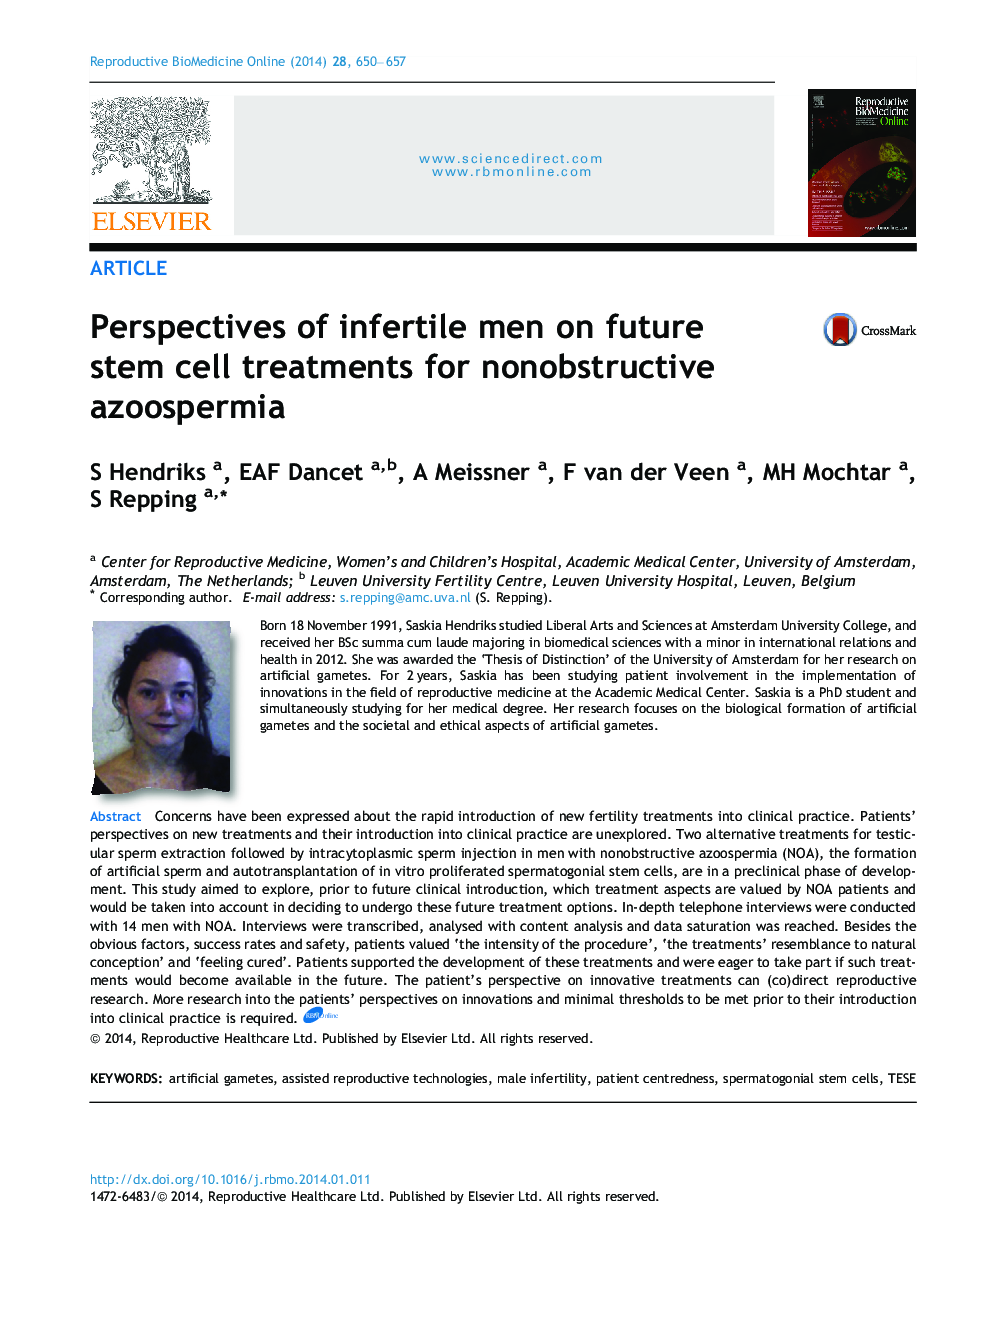 Perspectives of infertile men on future stem cell treatments for nonobstructive azoospermia